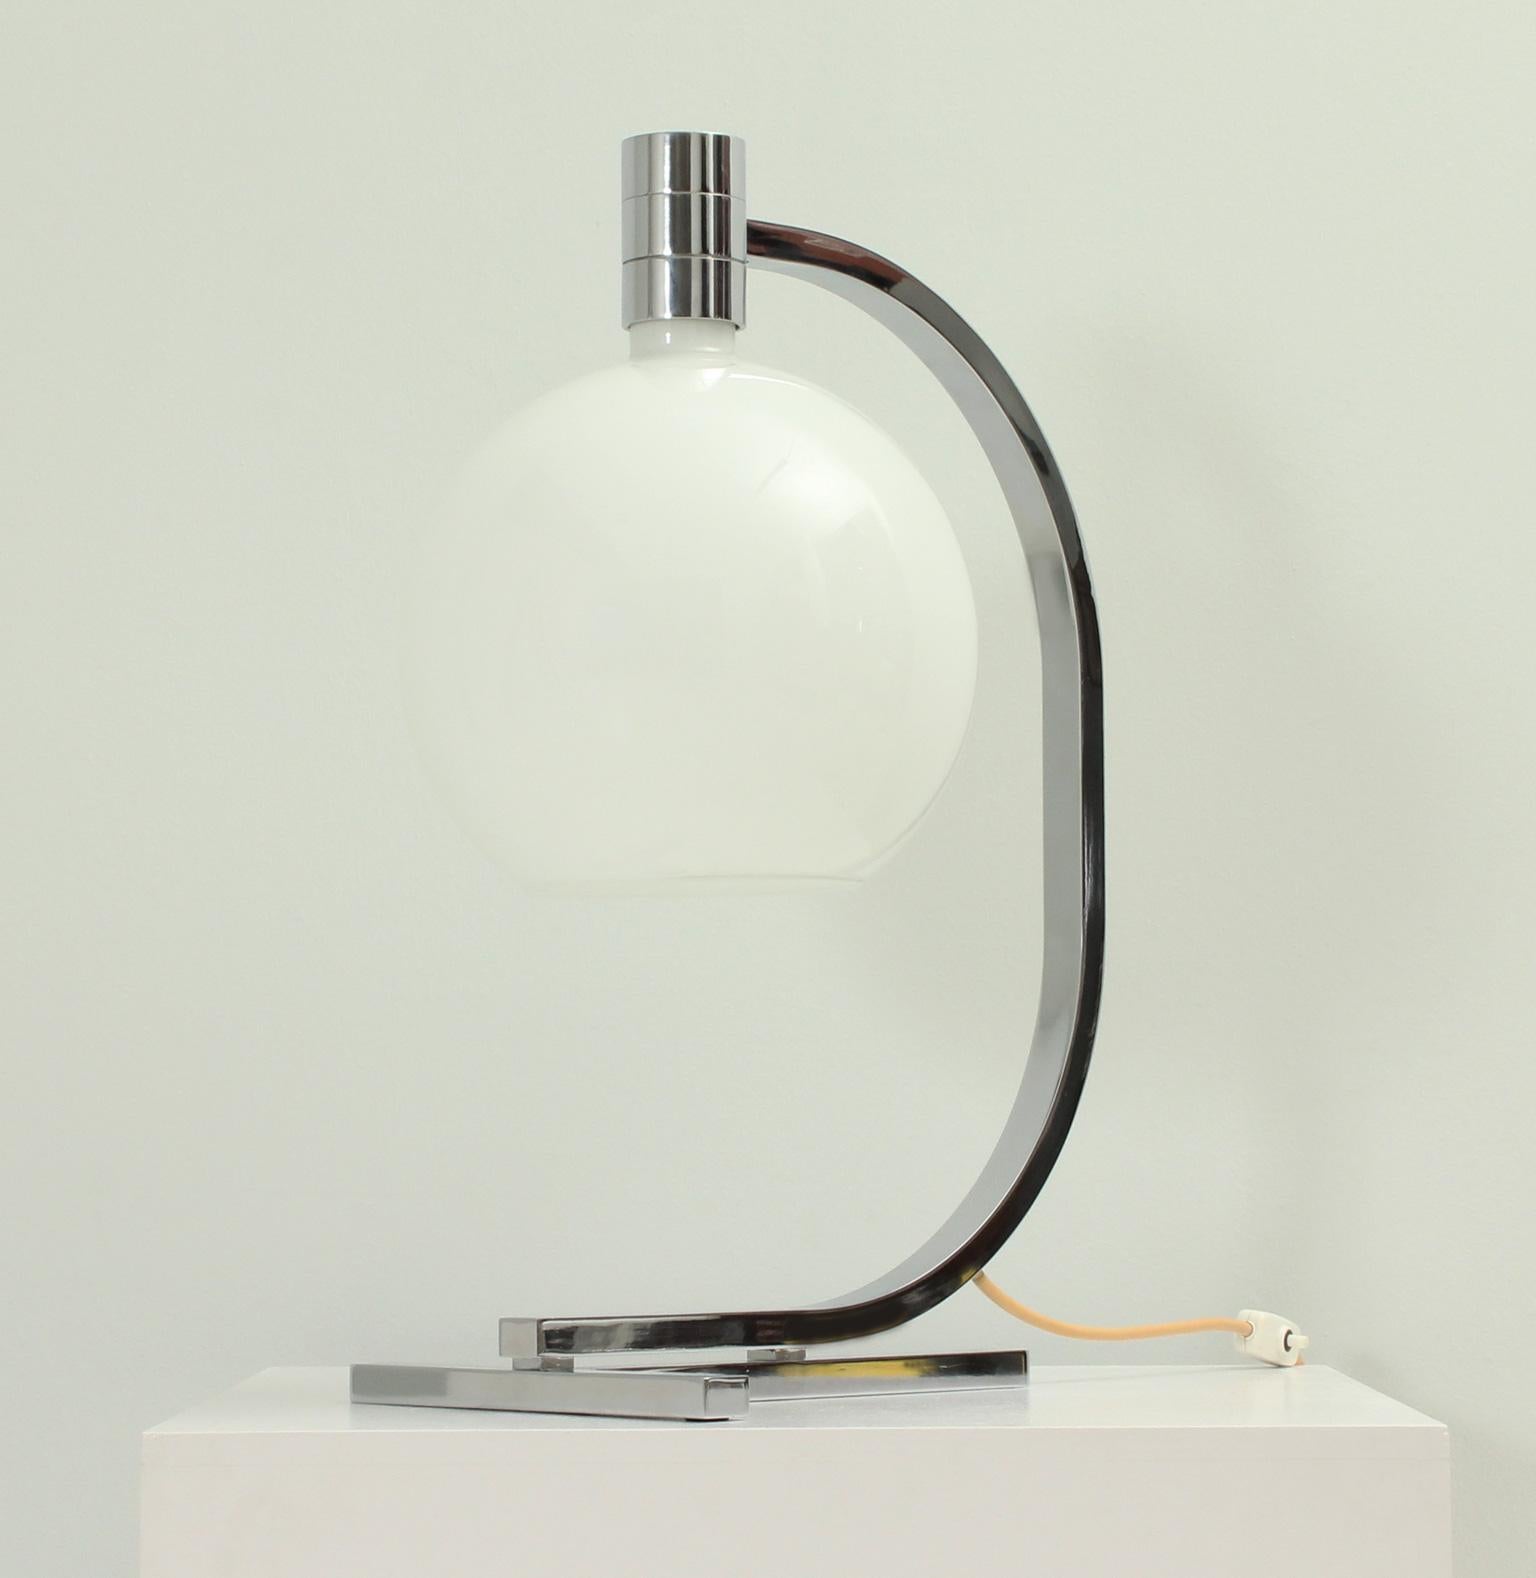 Table or desk lamp designed by Italian architects Franco Albini, Franca Helg and Antonio Piva as part of the AM/AS lamps series for the italian company Sirrah in 1969. Chromed steel structure and opal glass shade.